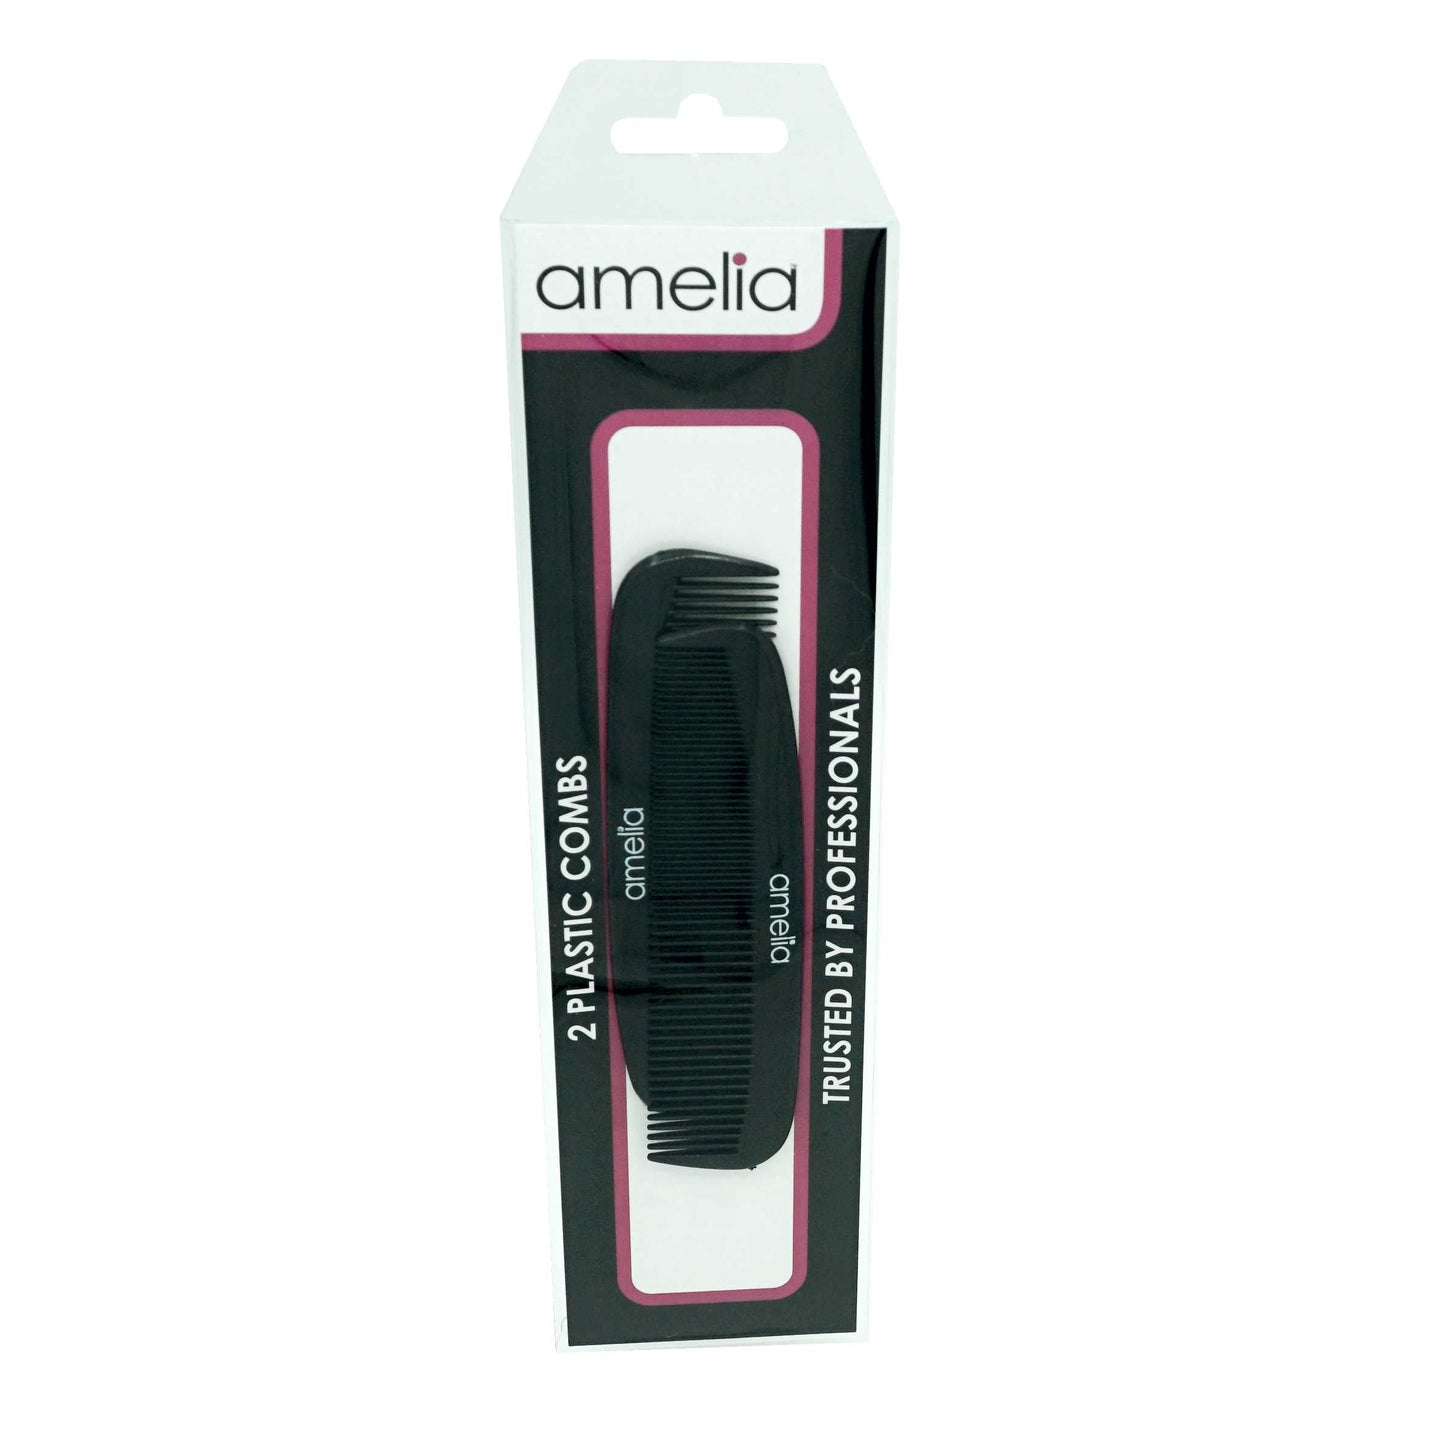 Amelia Beauty, 5in Black Plastic Pocket Comb, Made in USA, Professional Grade Pocket Hair Comb, Portable Salon Barber Shop Black Everyday Styling Comb Hair Styling Tool, 5"x1.25", 2 Pack